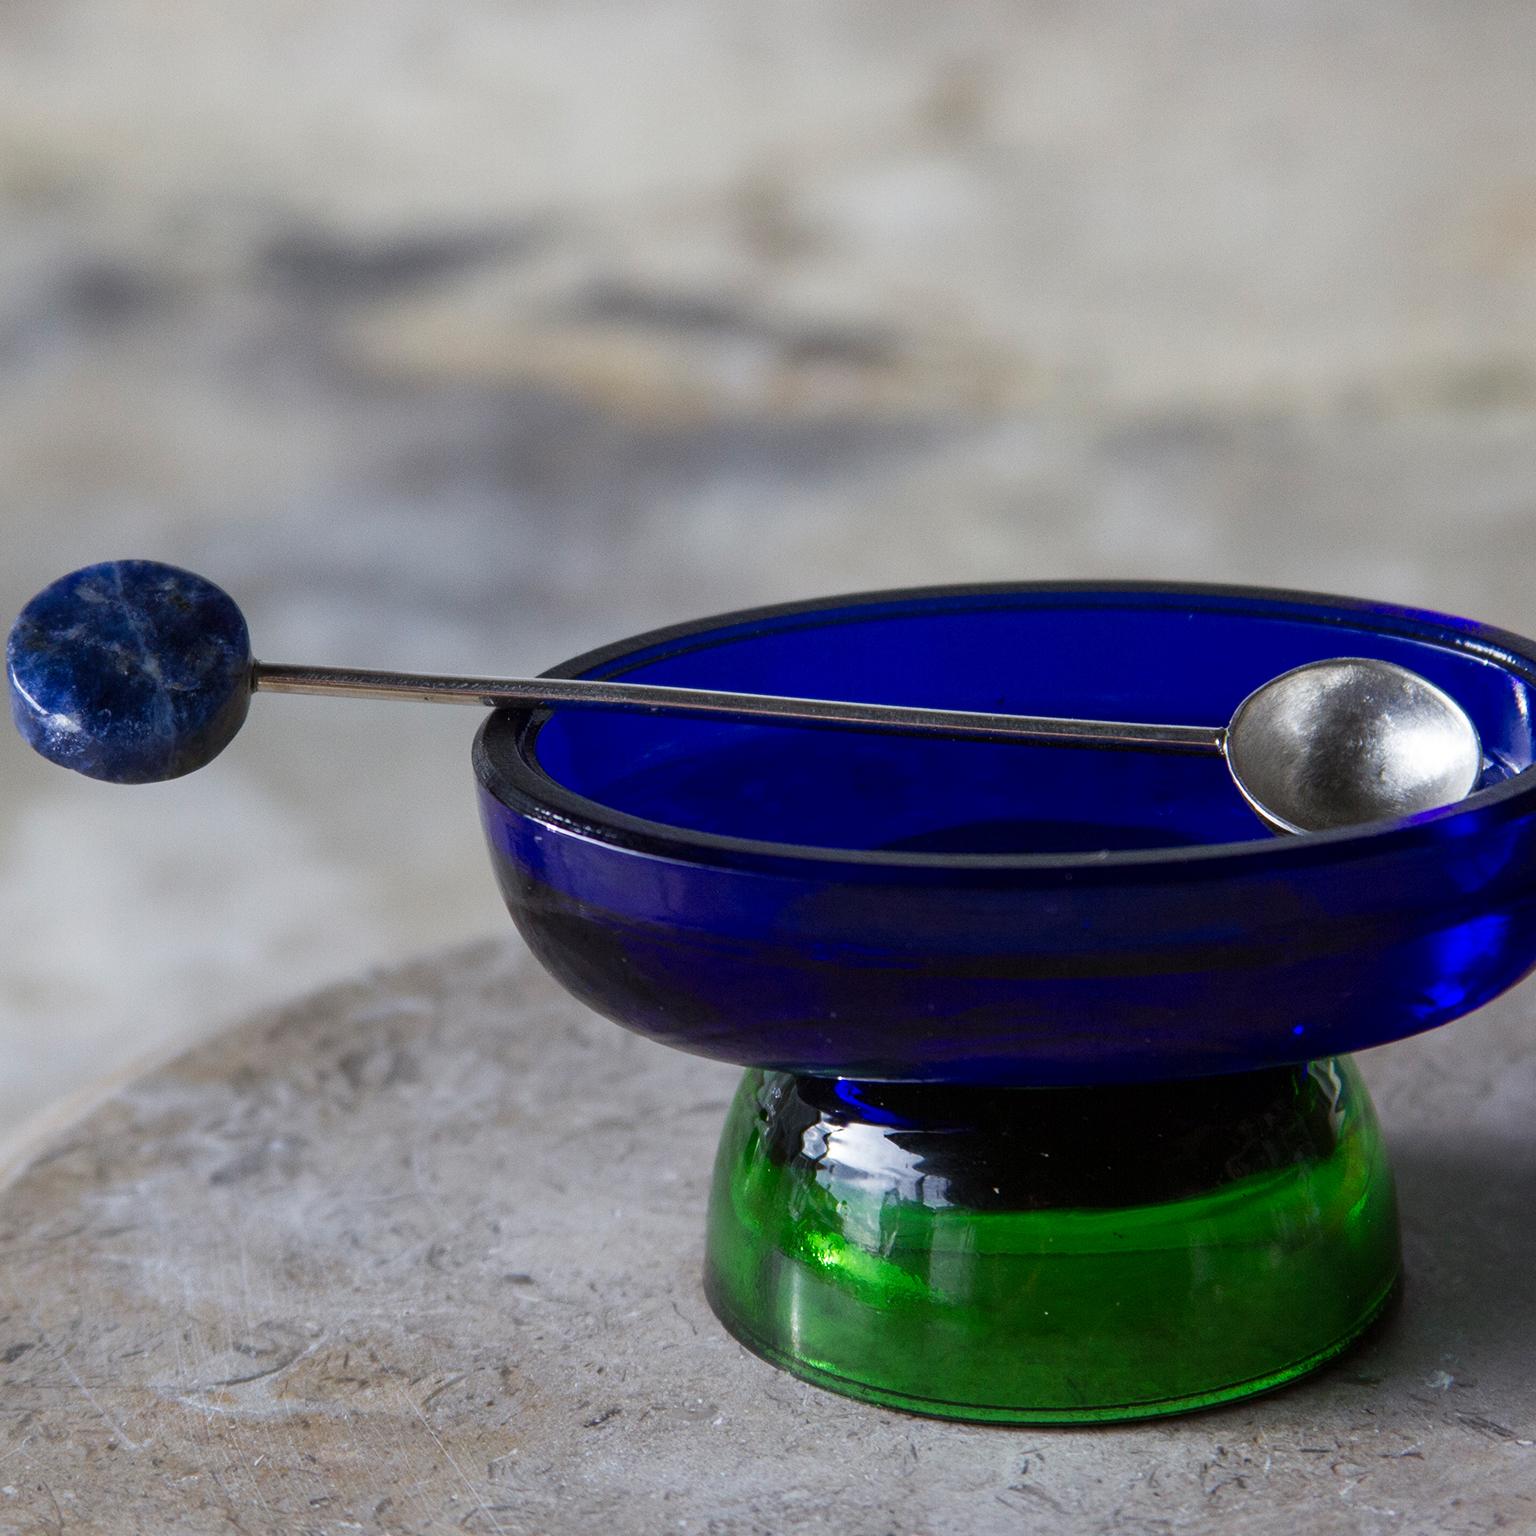 Salt cellars are part of the collection Ambar launched in 2019. A serie of different delicate salt or condiments containers in different sizes. Each container comes with a small silver spoon.
This series of blown-glass wares was created by a Tuscan